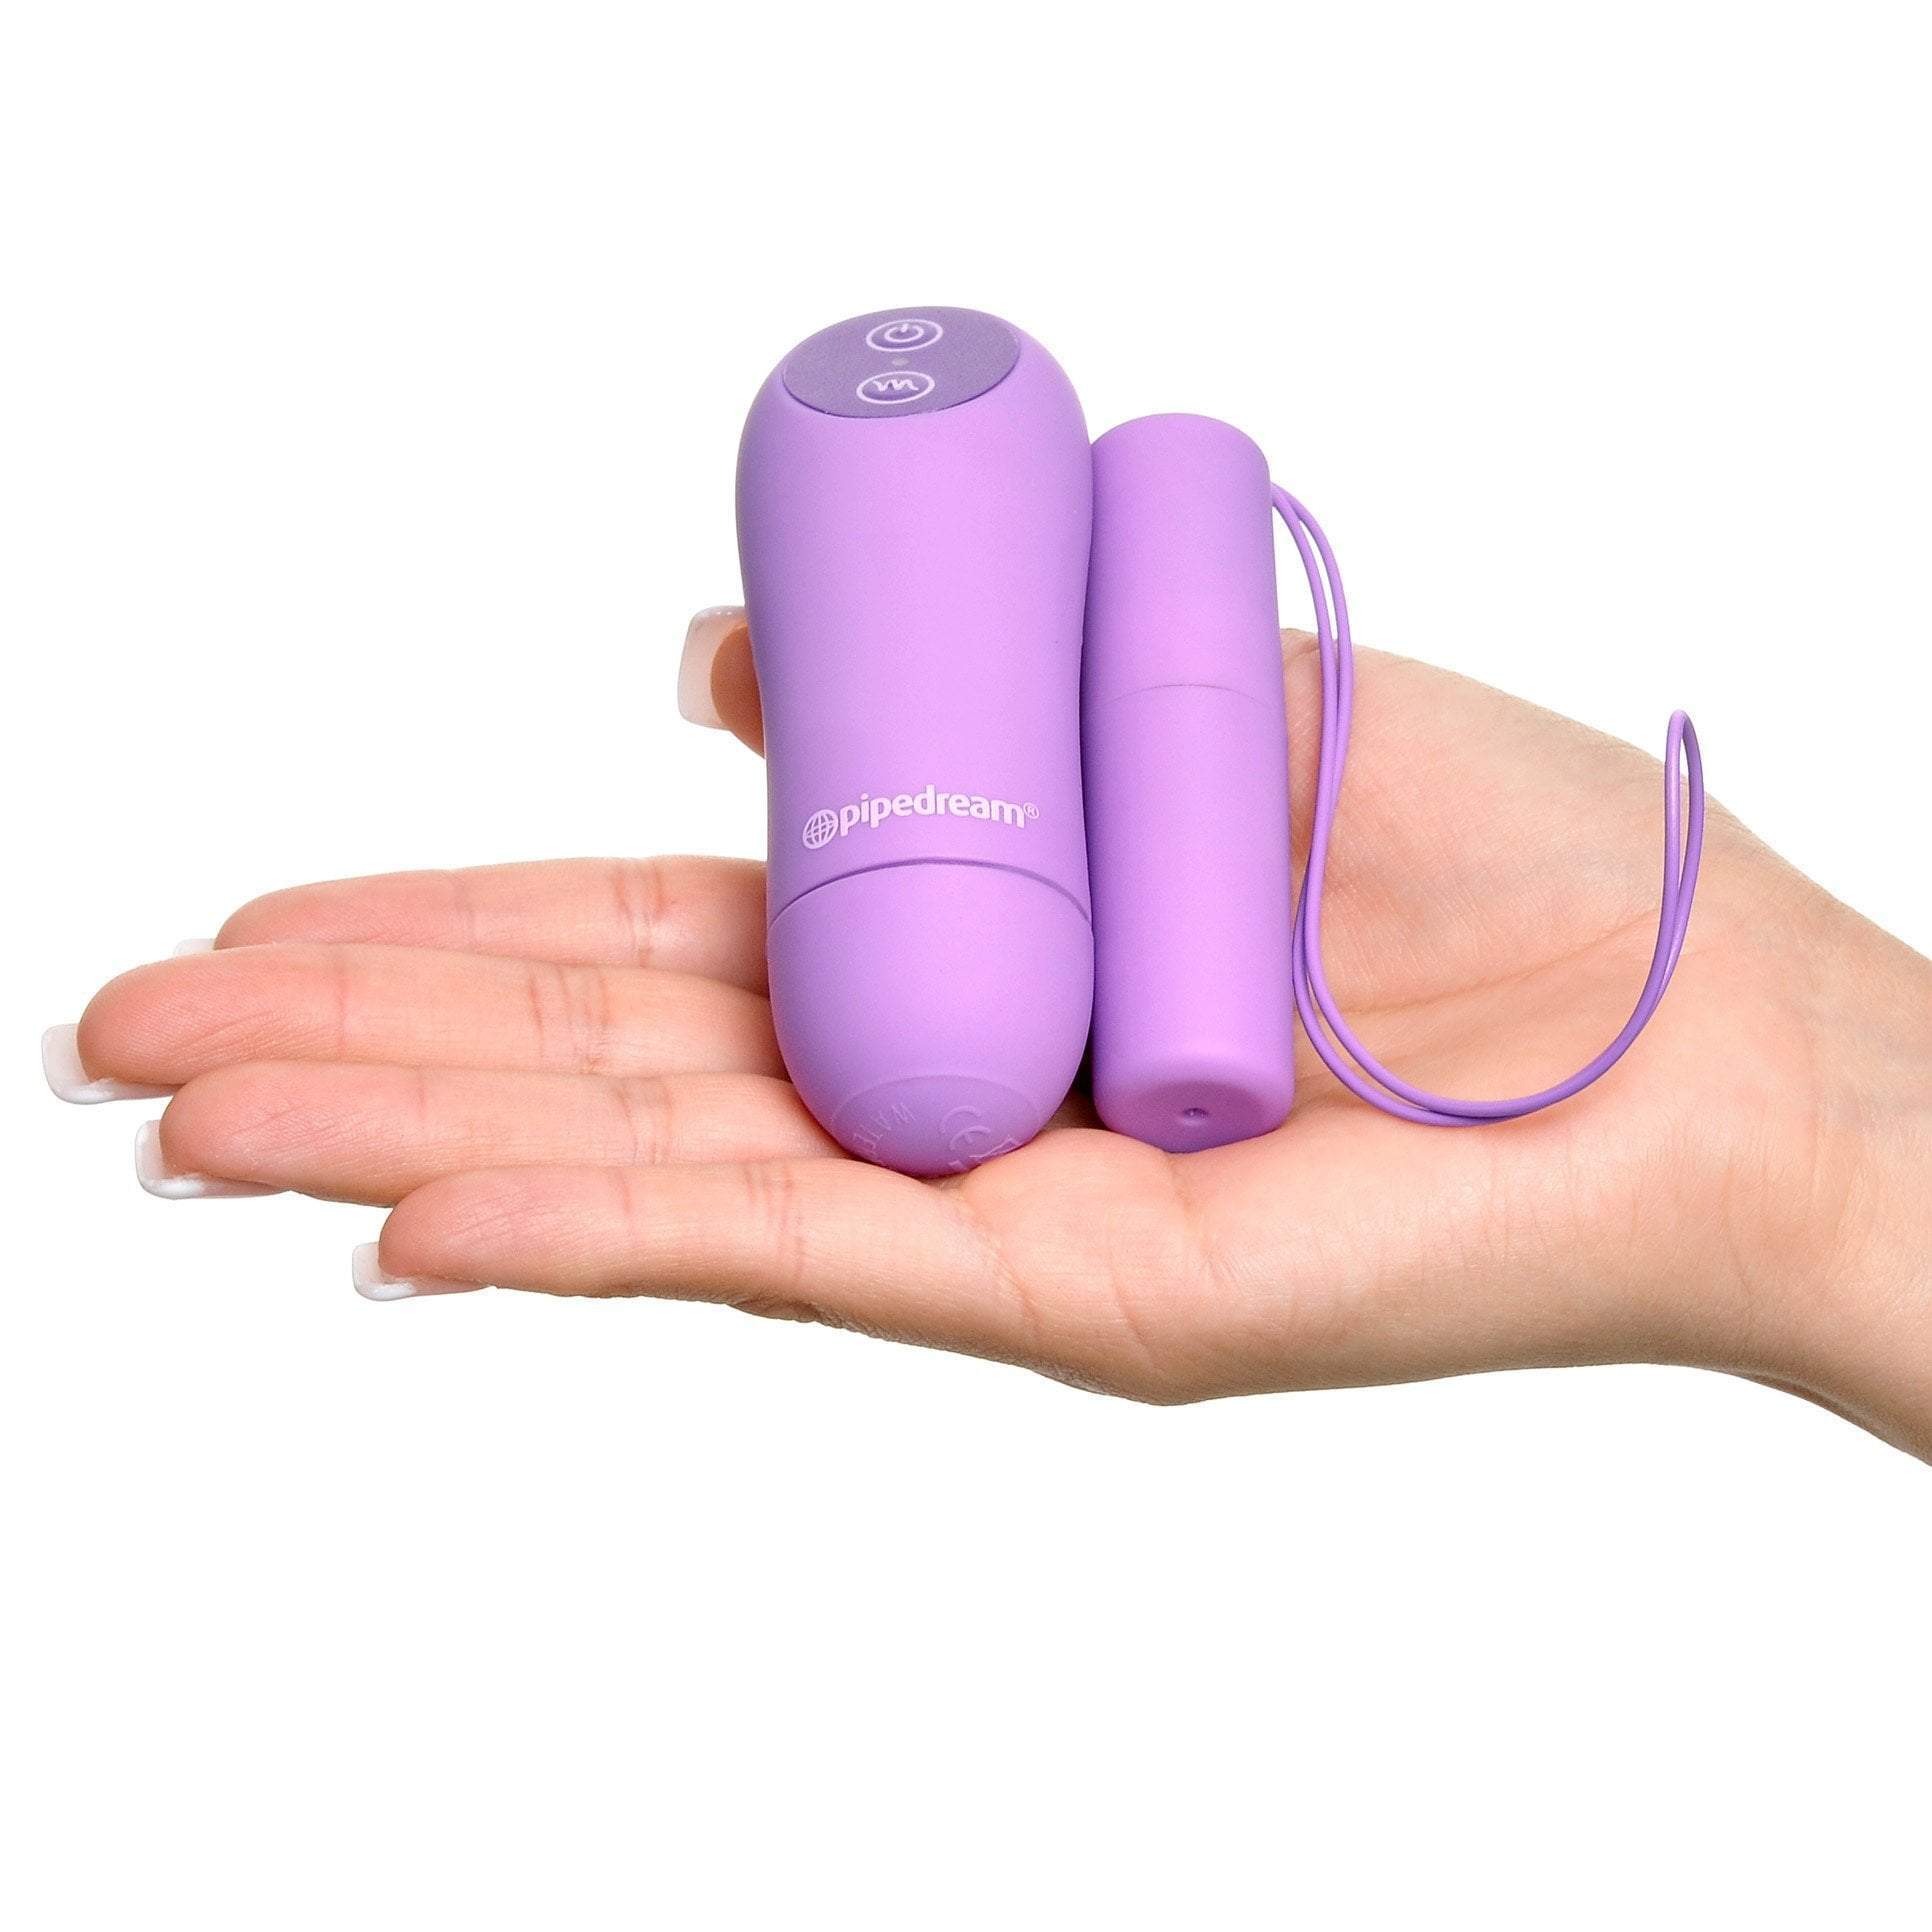 Pipedream - Fantasy For Her Cheeky Thrill-Her Panty Vibrator (Purple) -  Panties Massager Remote Control (Vibration) Non Rechargeable  Durio.sg